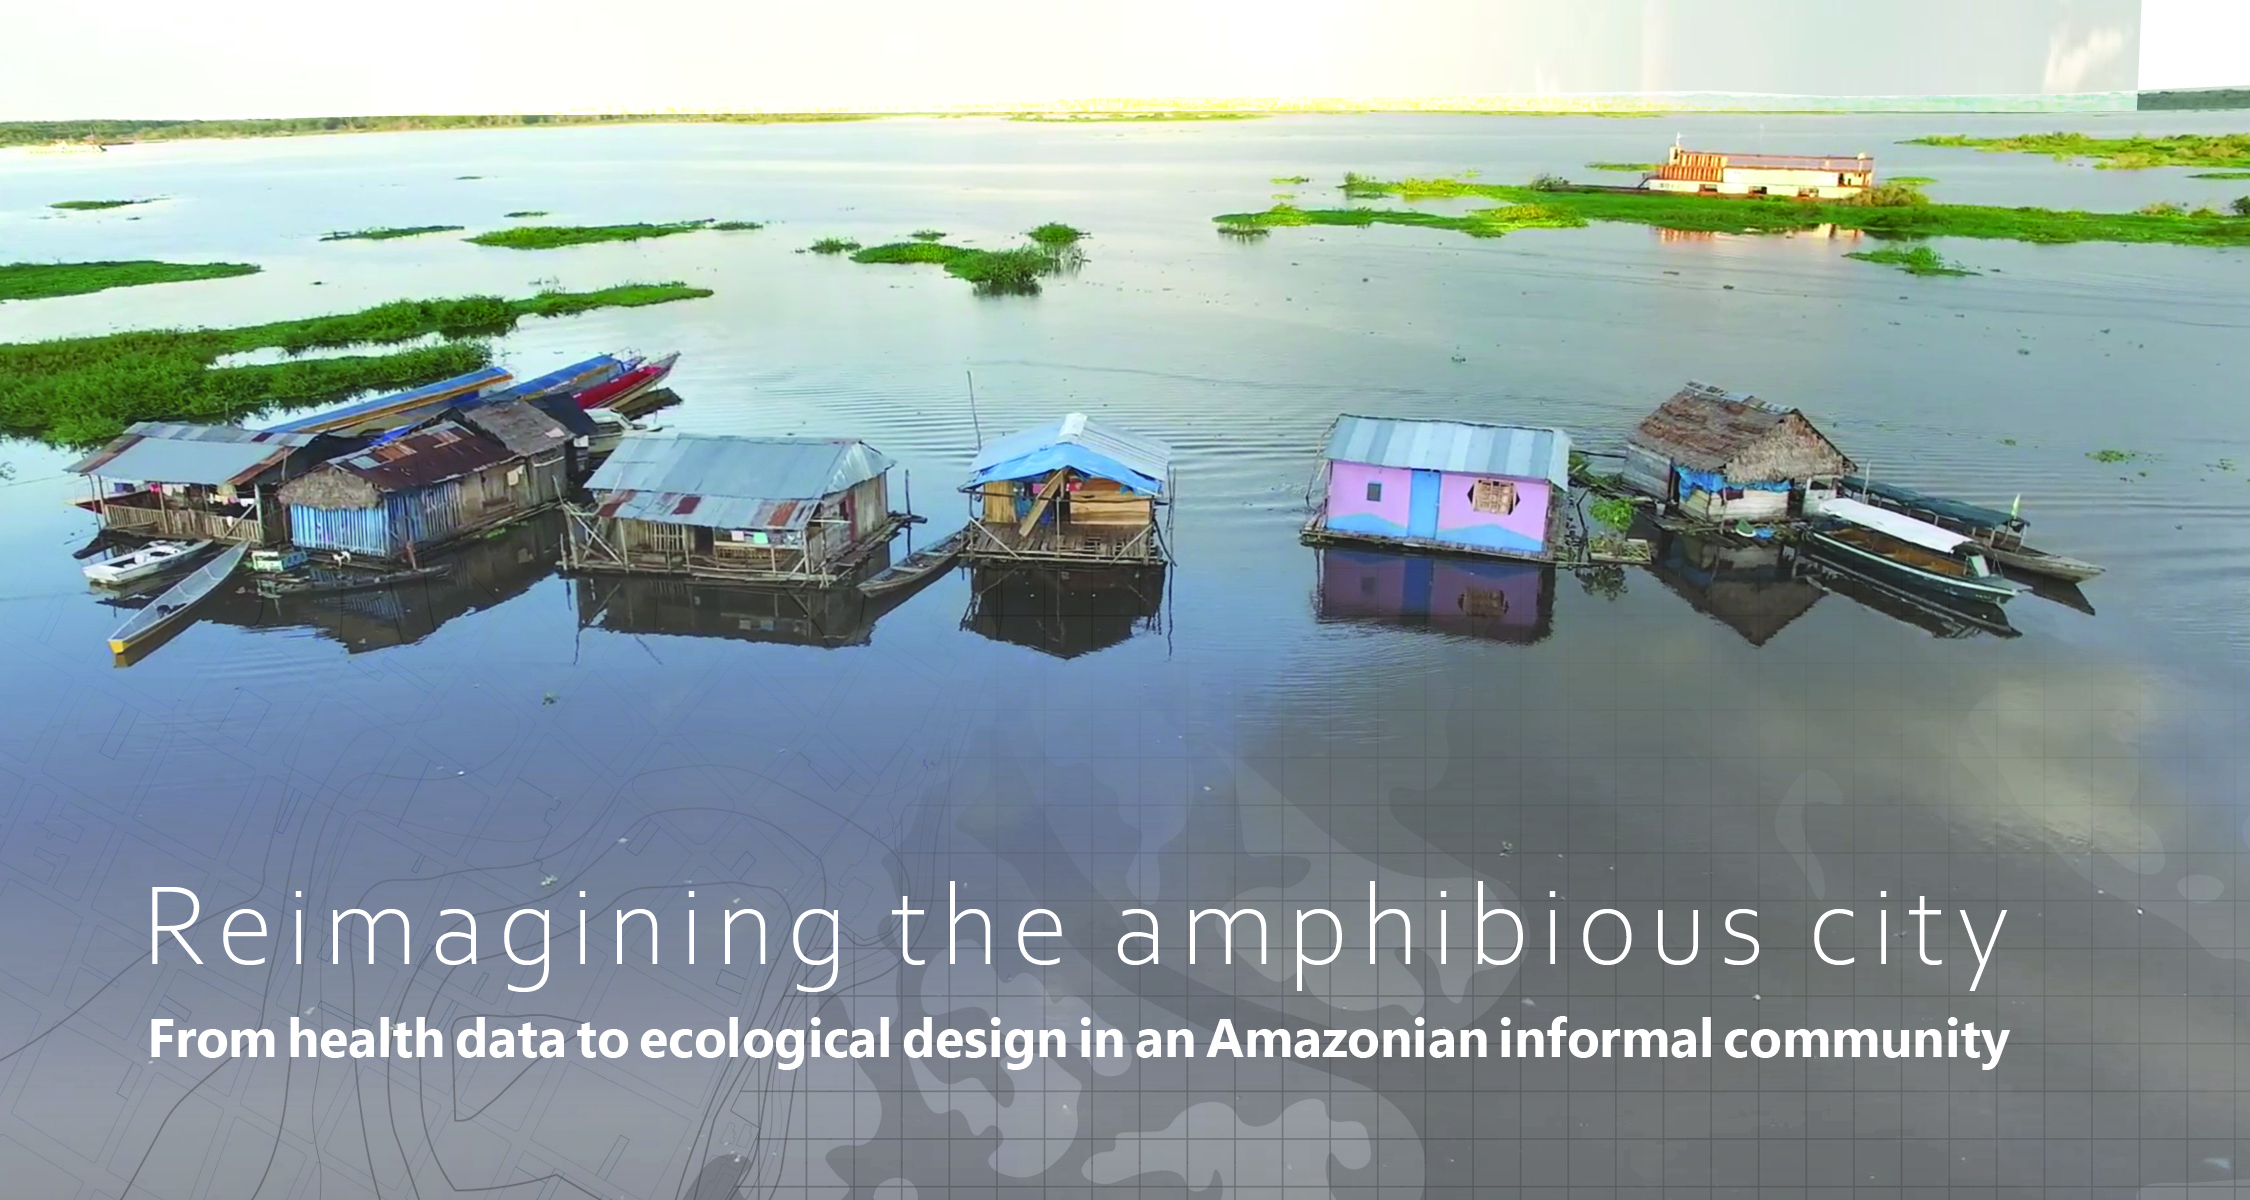 Reimagining the amphibious city: From health data to ecological design in an Amazonian informal community